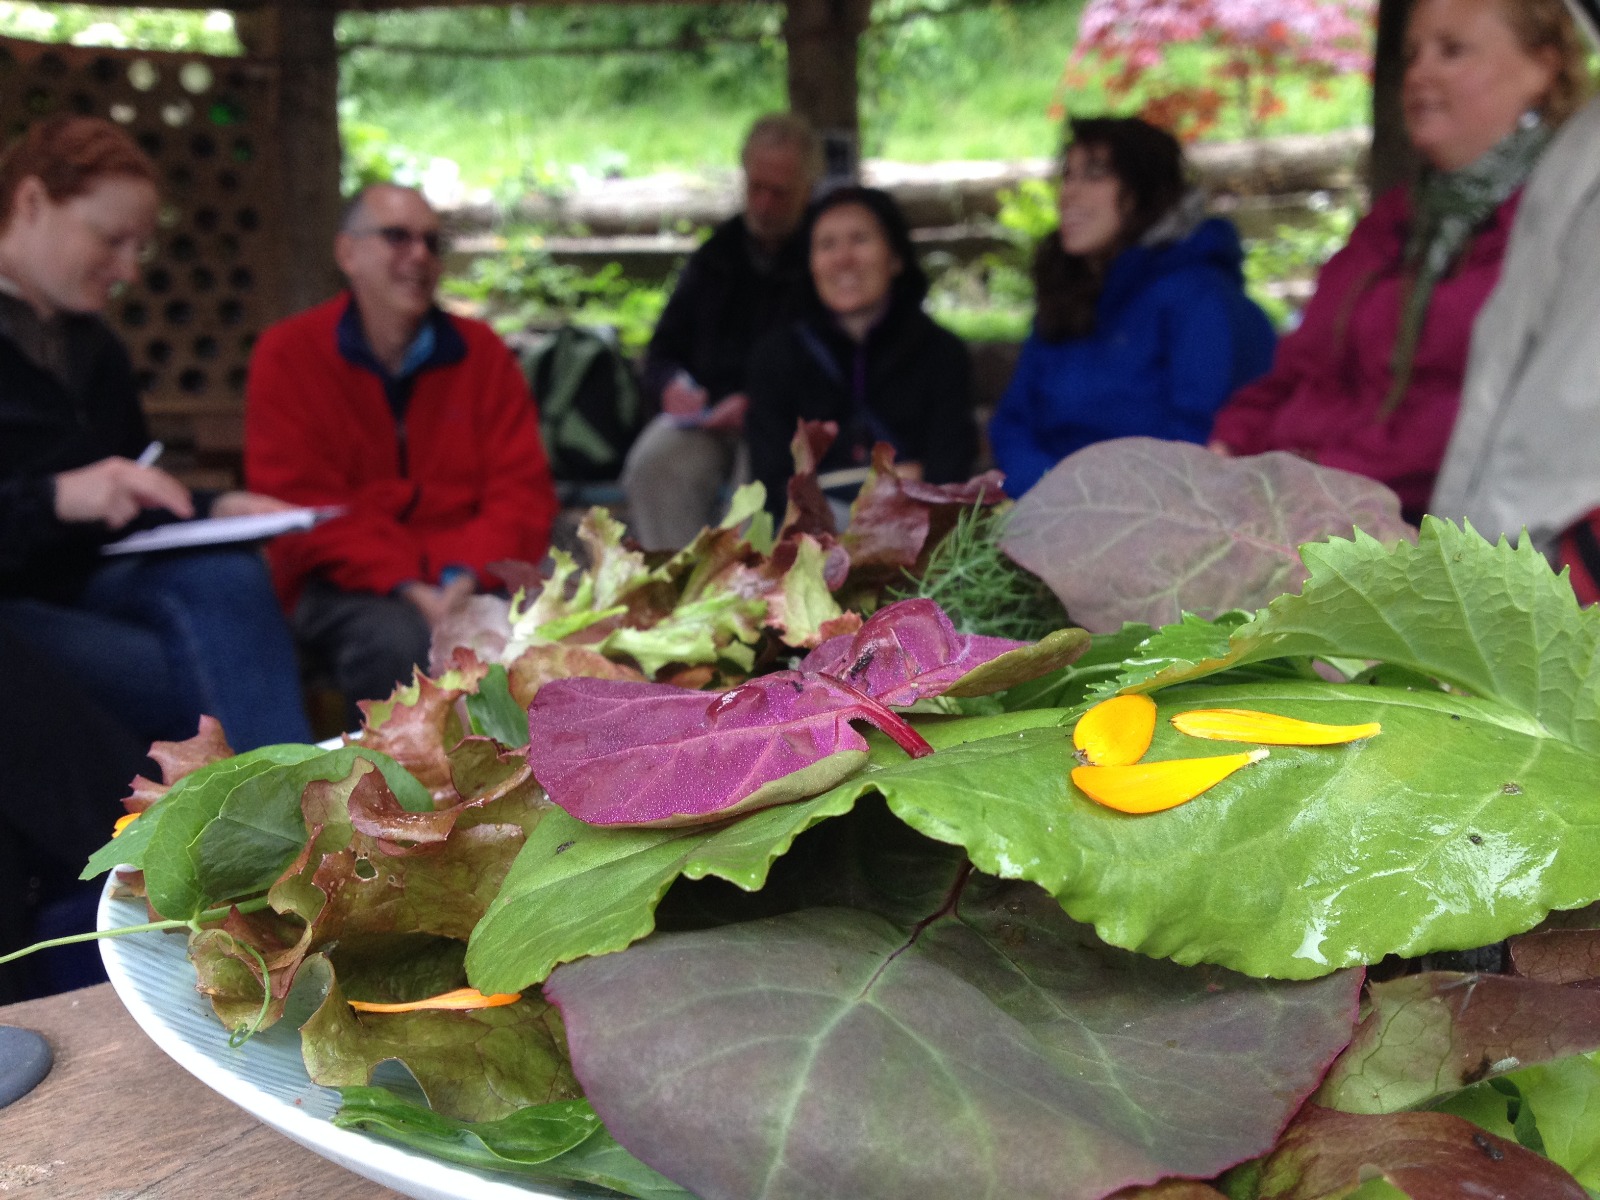 Plate of leafy vegatables with group of people in background